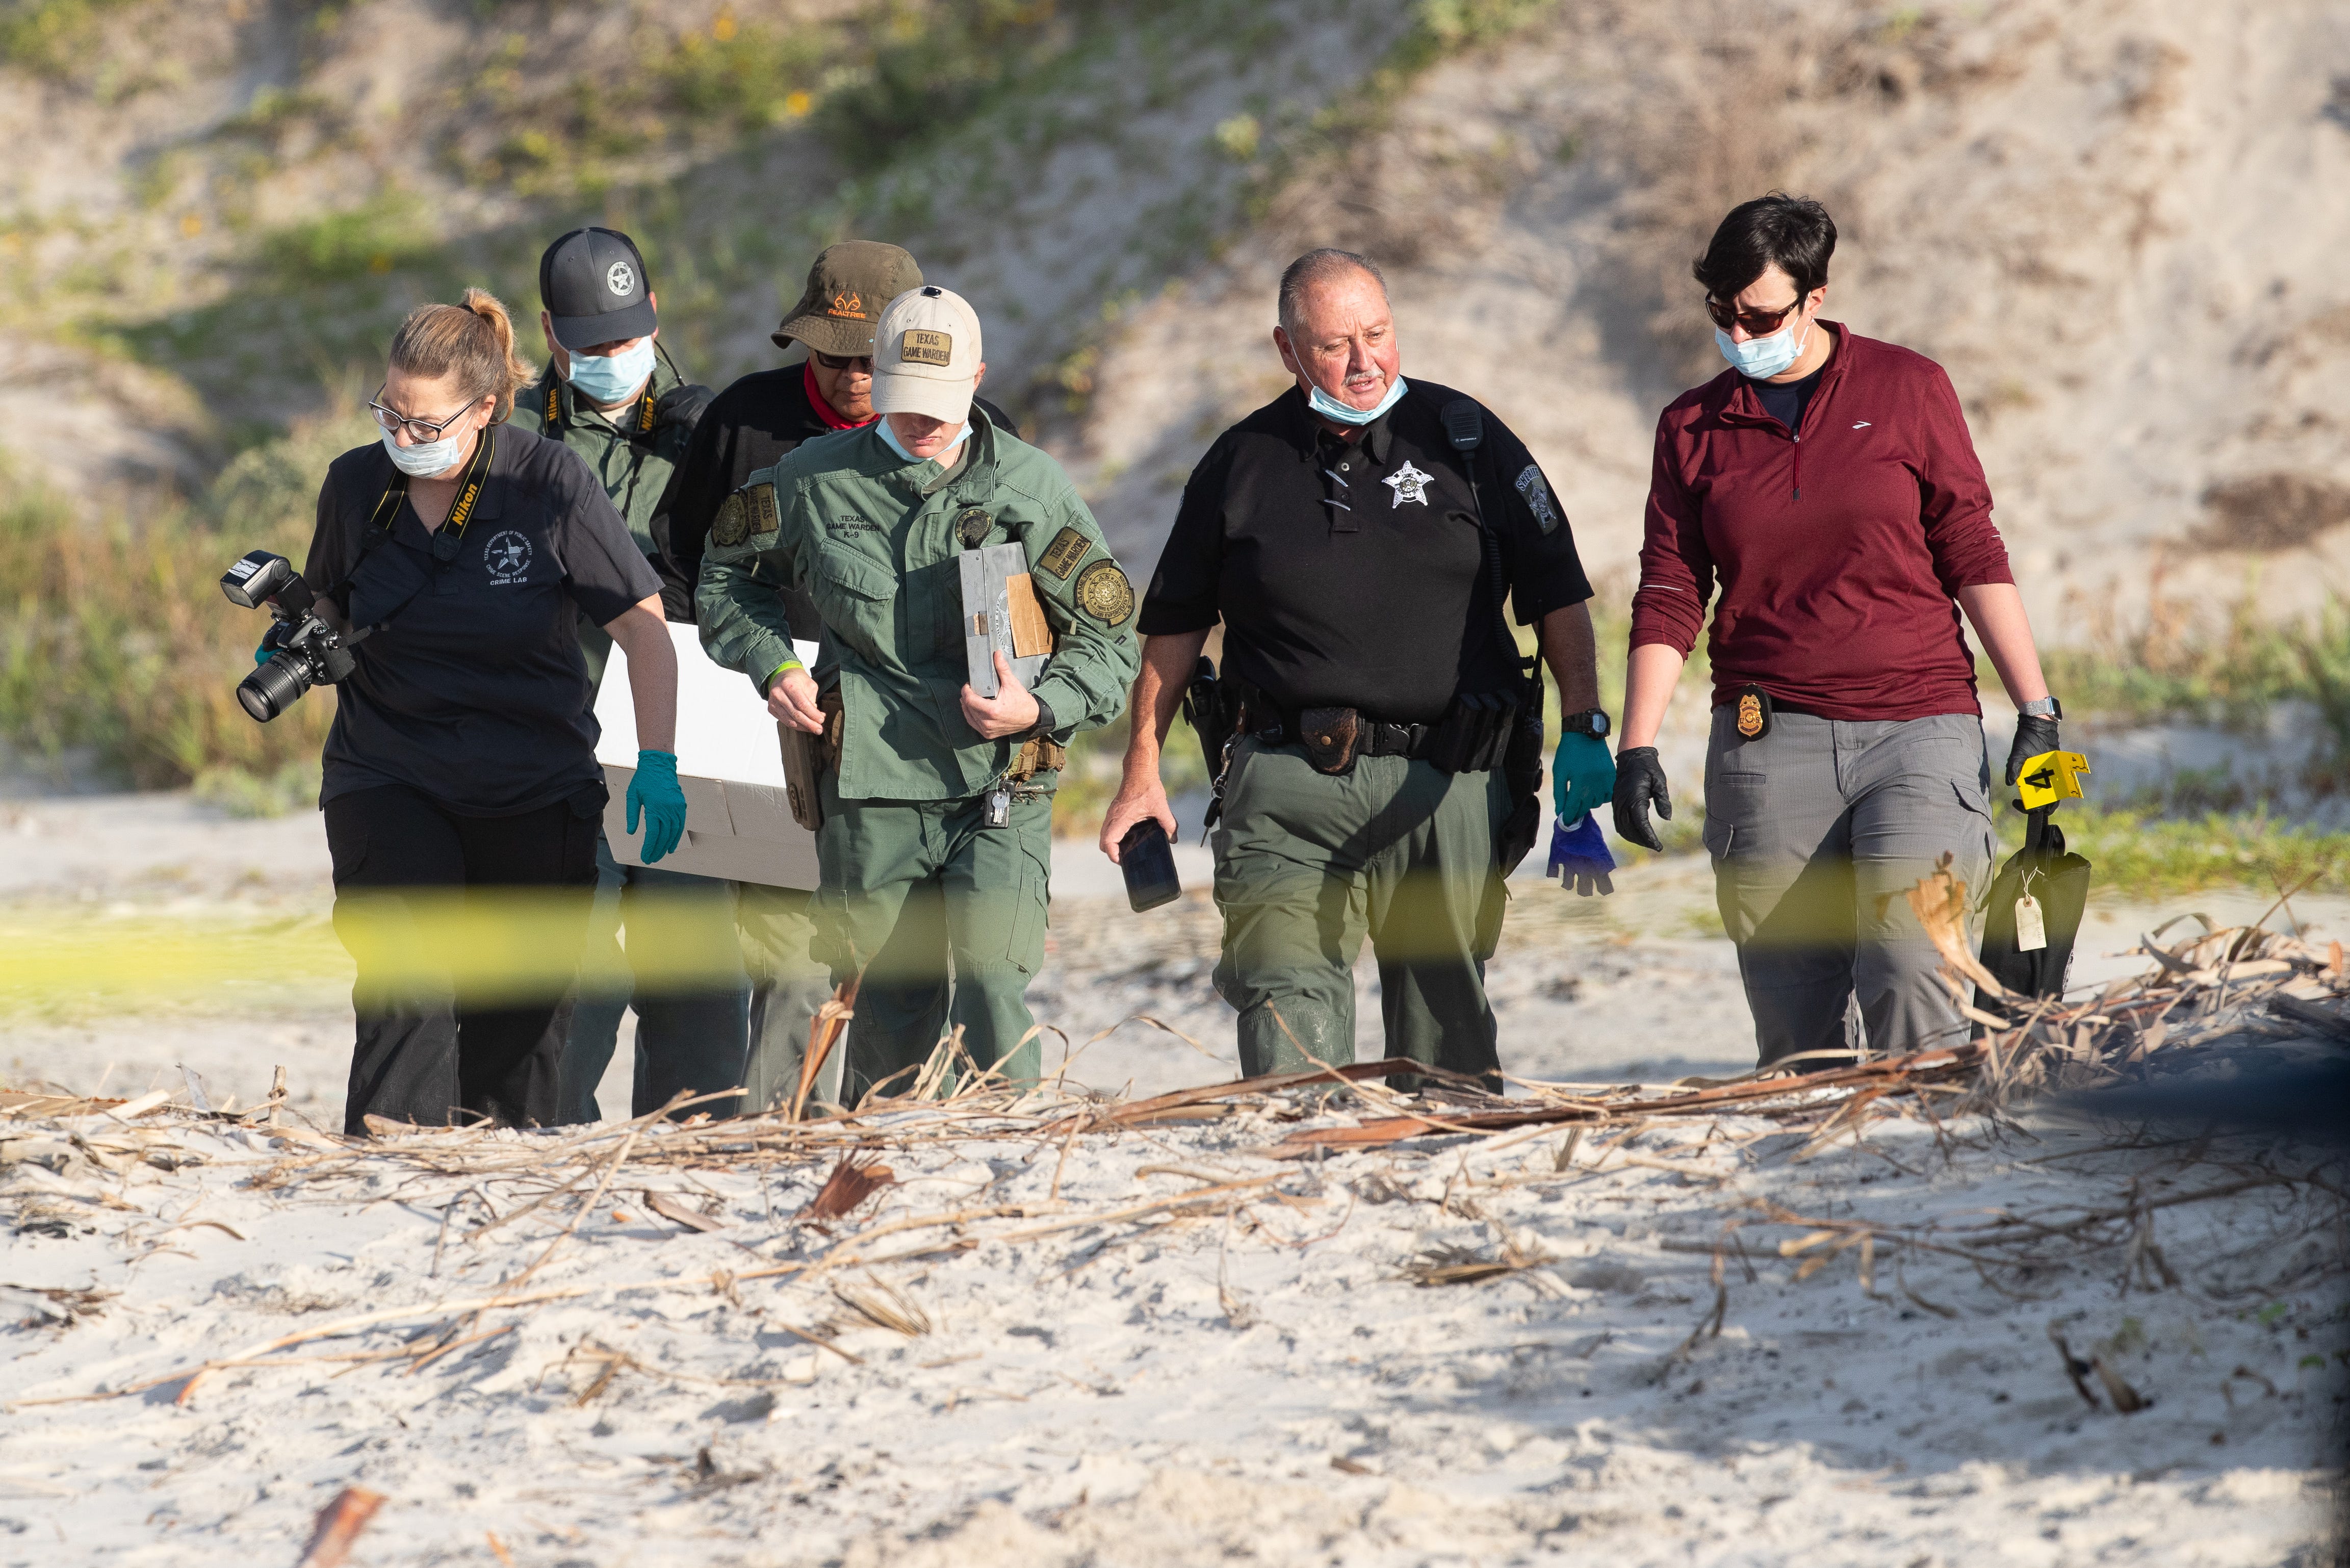 db16c3d0-61c8-4b3c-9d46-b94112323805-body_on_Kleberg_beach_-7 Missing New Hampshire couple found buried on Texas beach, sheriff's office says